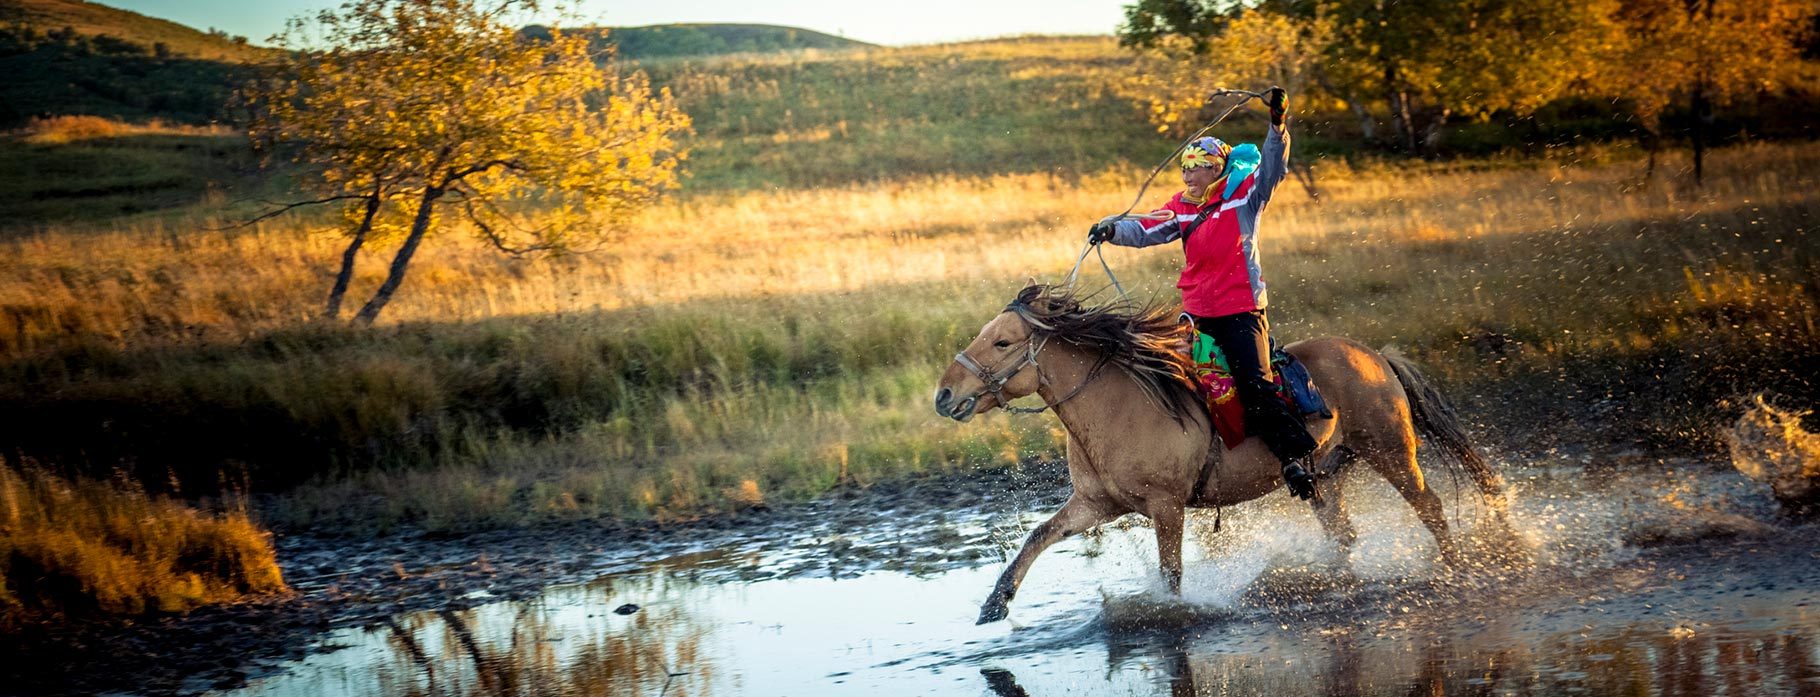 6 DAYS HULUNBUIR IMMERSION IN INNER MONGOLIA